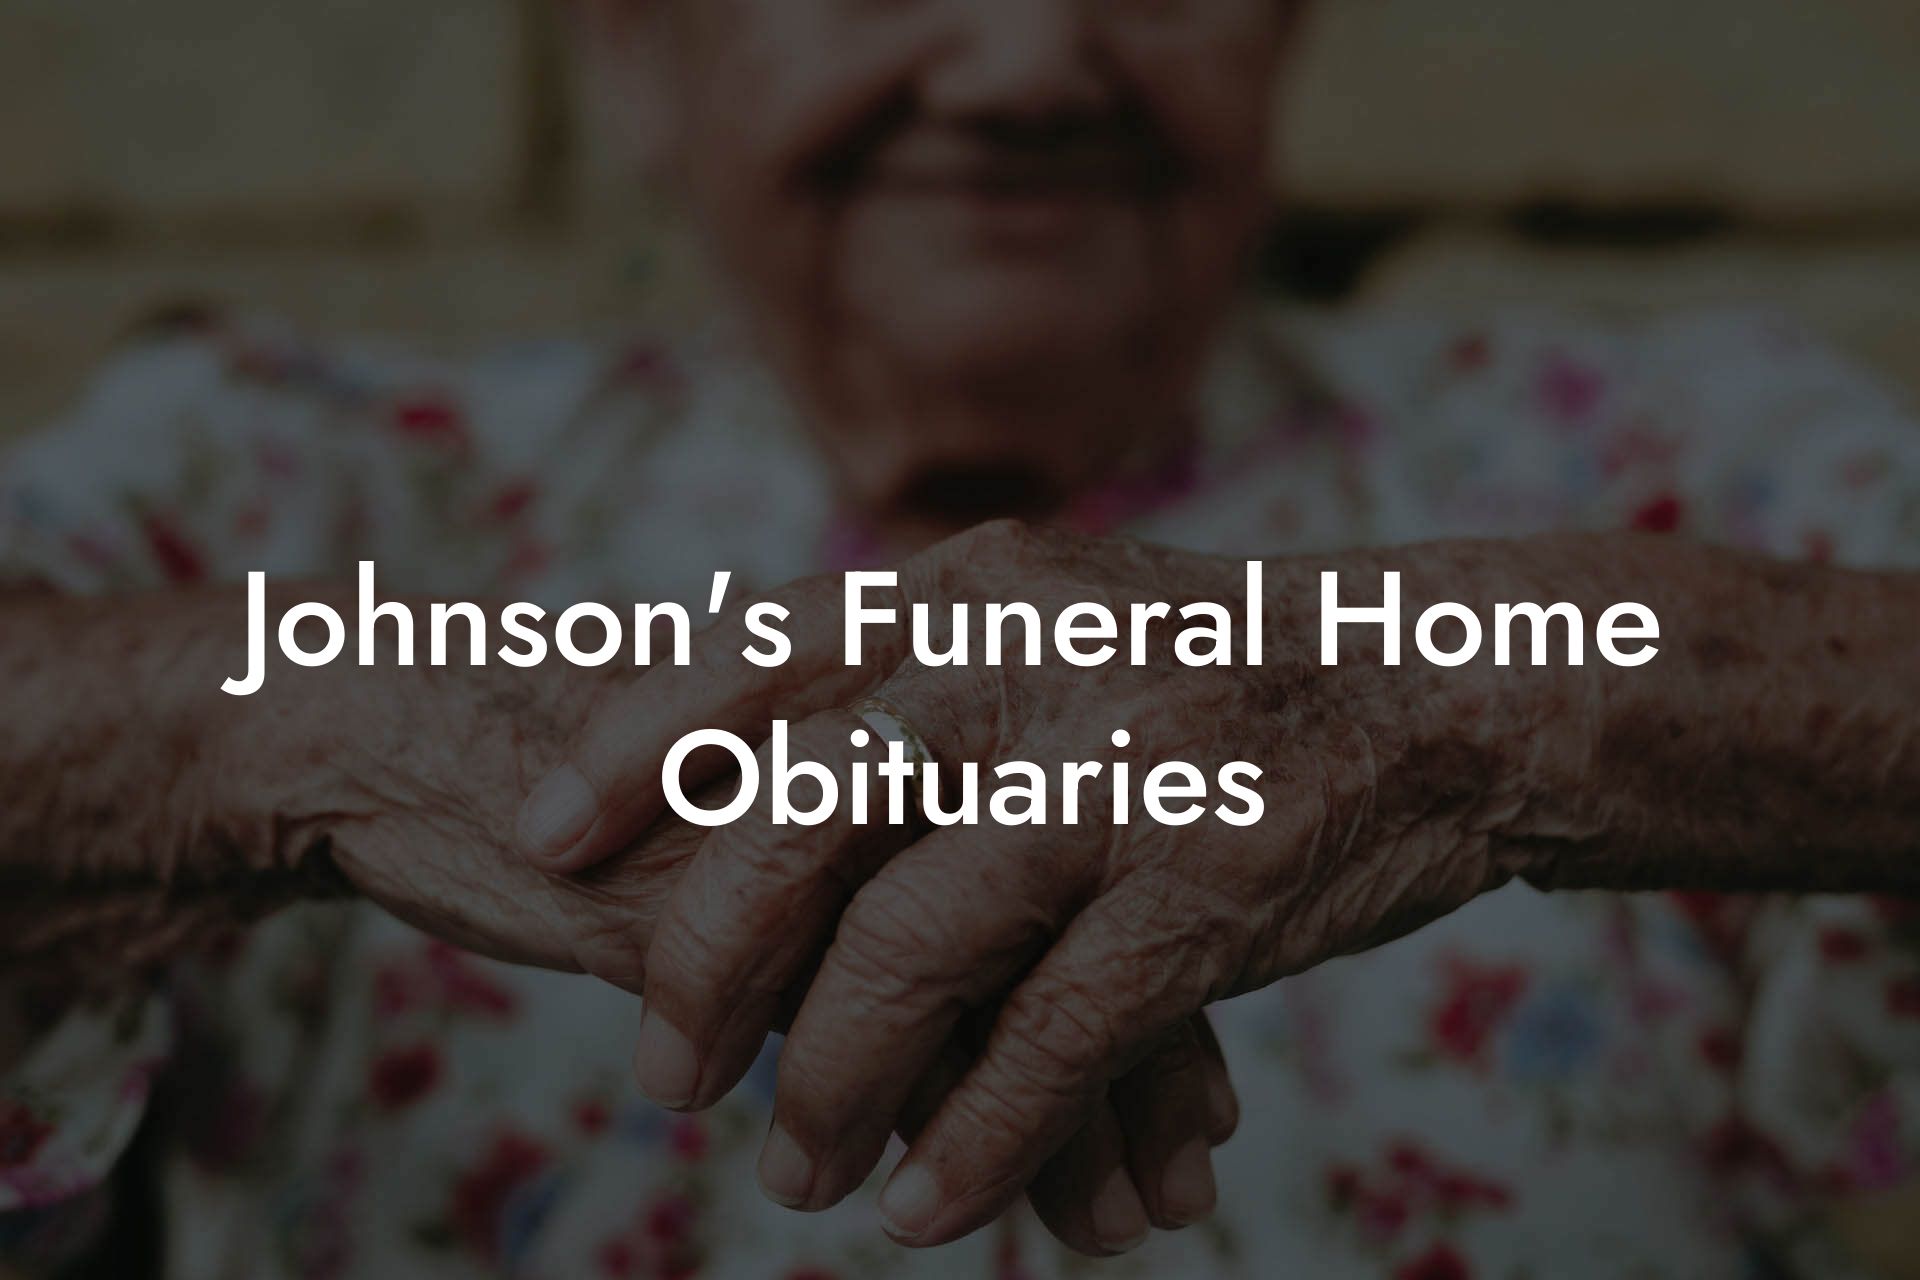 Johnson's Funeral Home Obituaries